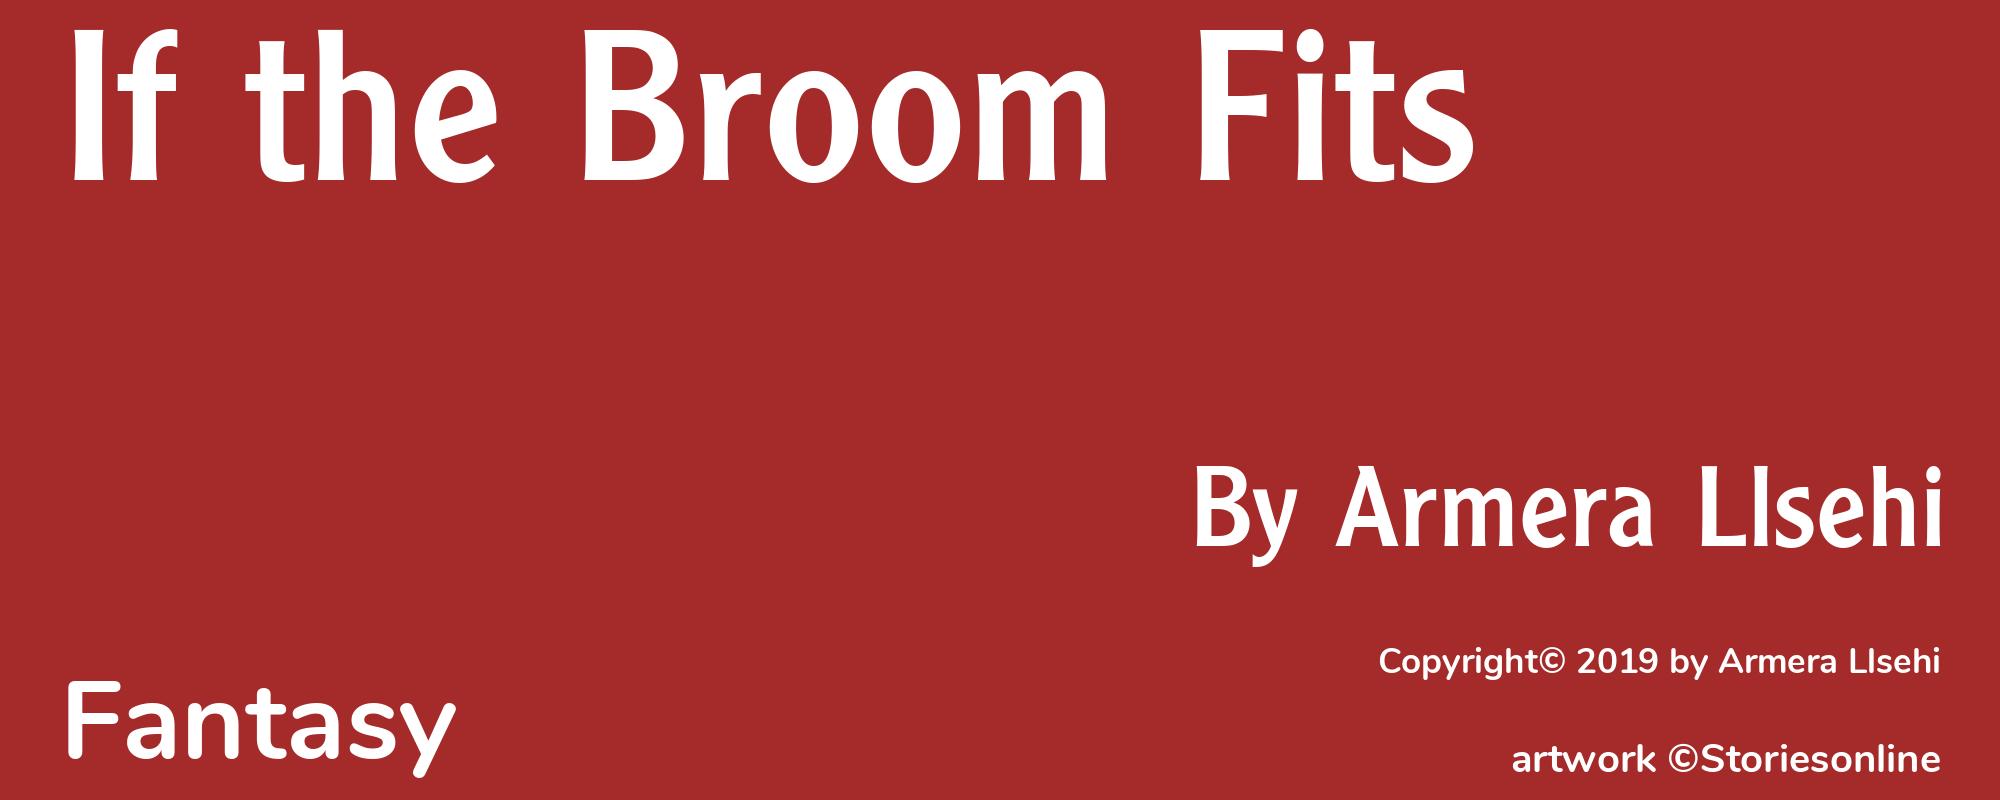 If the Broom Fits - Cover